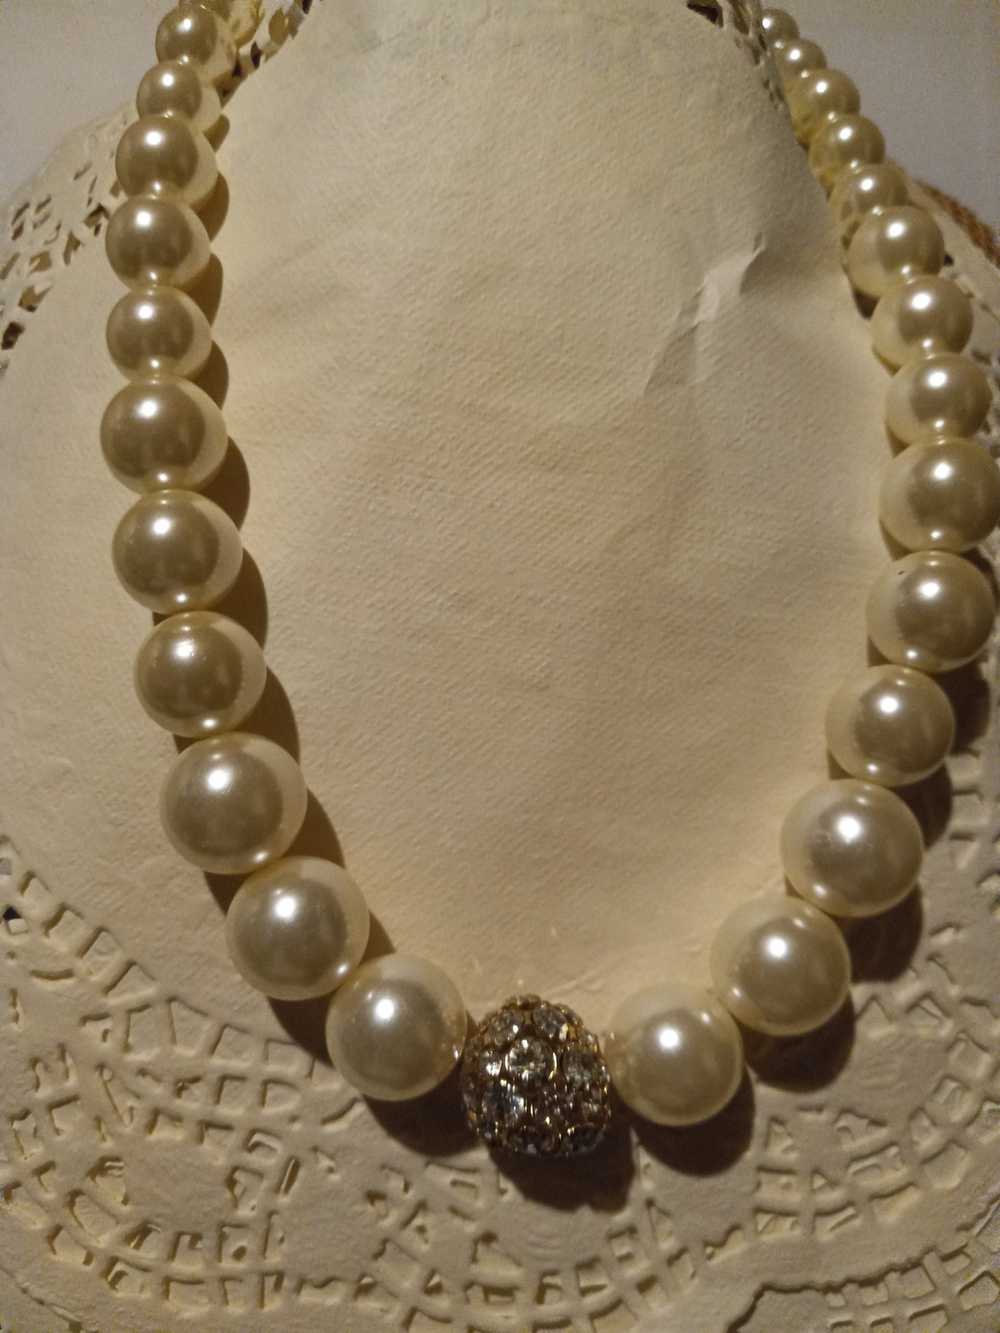 Vintage White Glass Ball Necklace - image 2